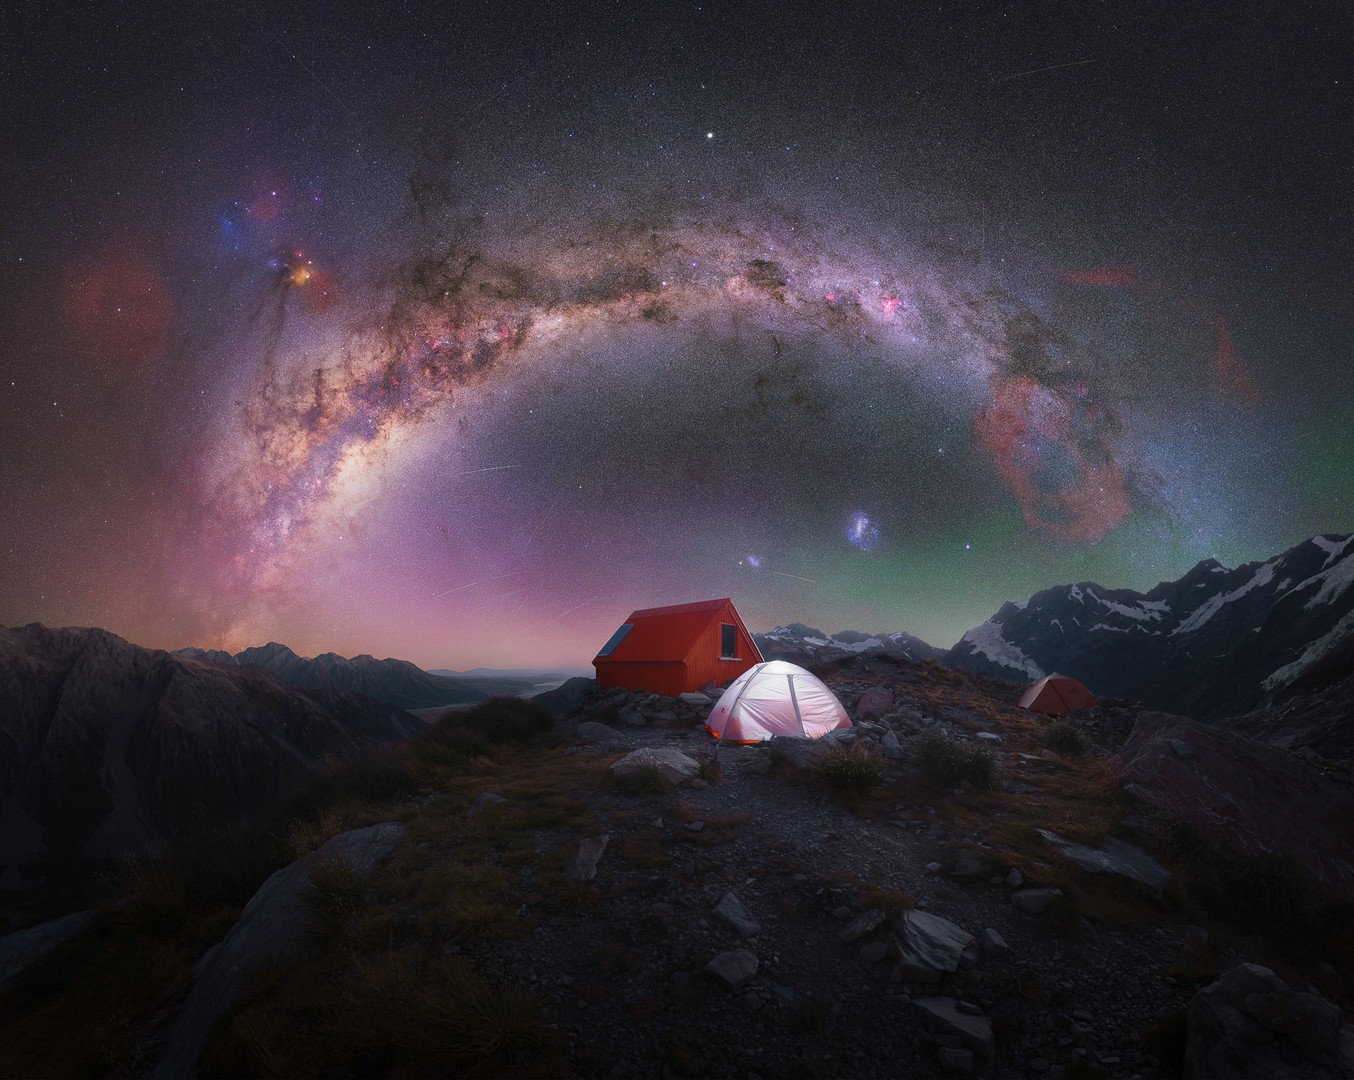 “Capture The Atlas” Unveiled The Best Milky Way Photographs Of The Year